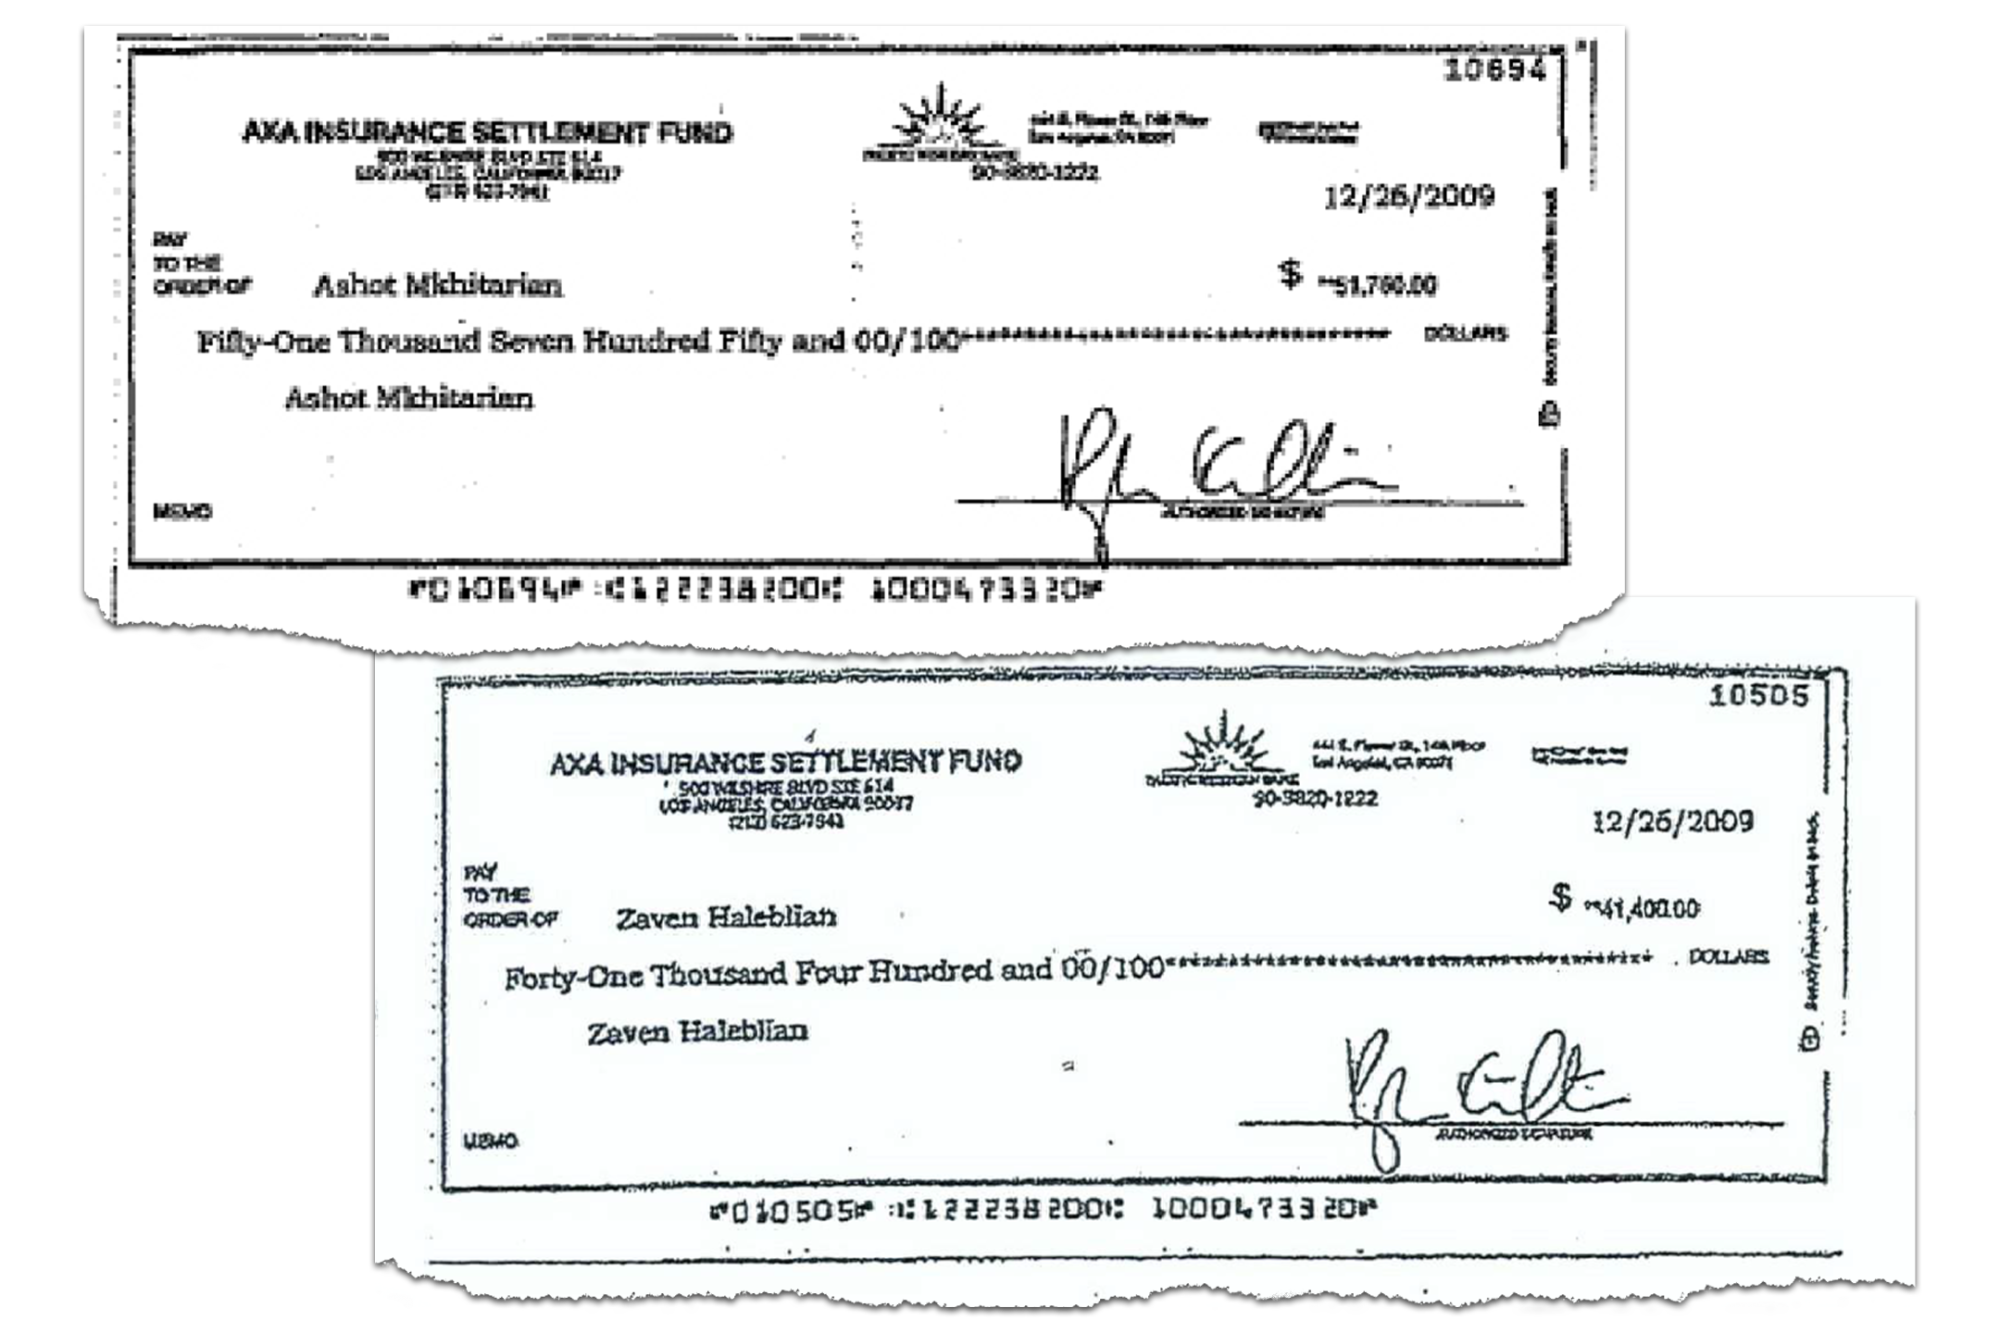 Scans of two checks.